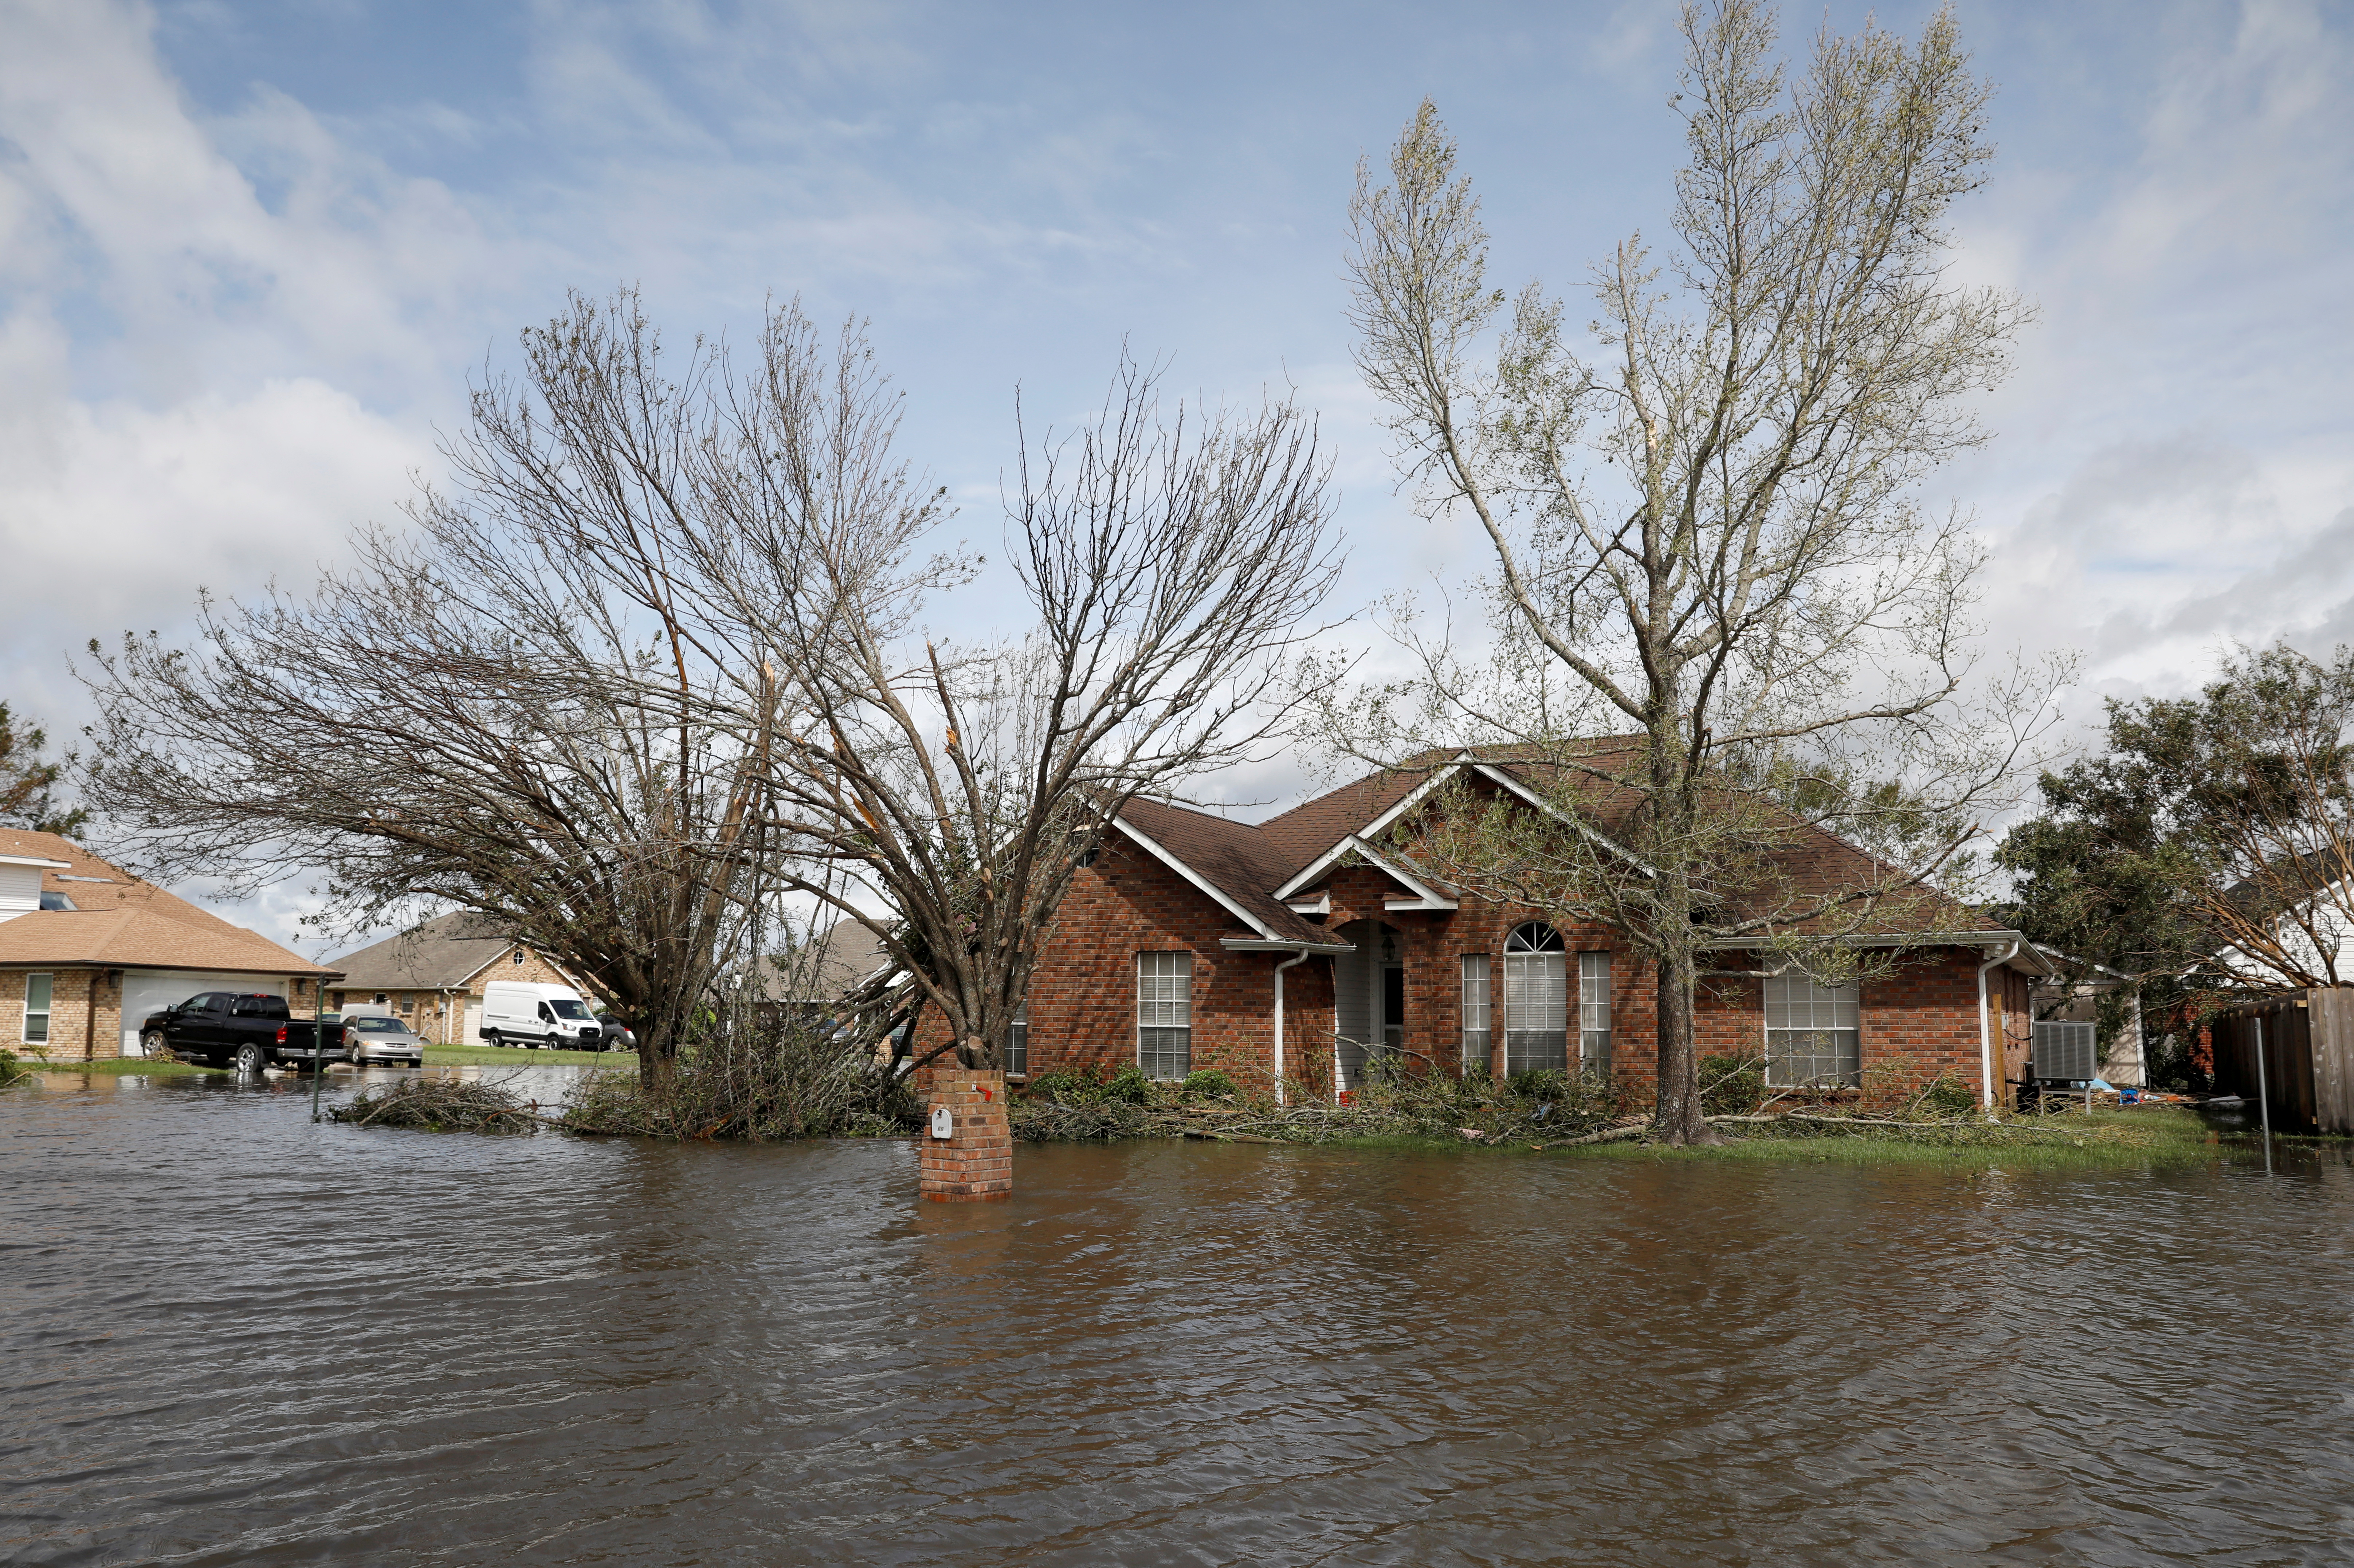 A flooded building is pictured after Hurricane Ida made landfall in Louisiana, in Laplace, Louisiana, U.S. August 30, 2021. REUTERS/Marco Bello